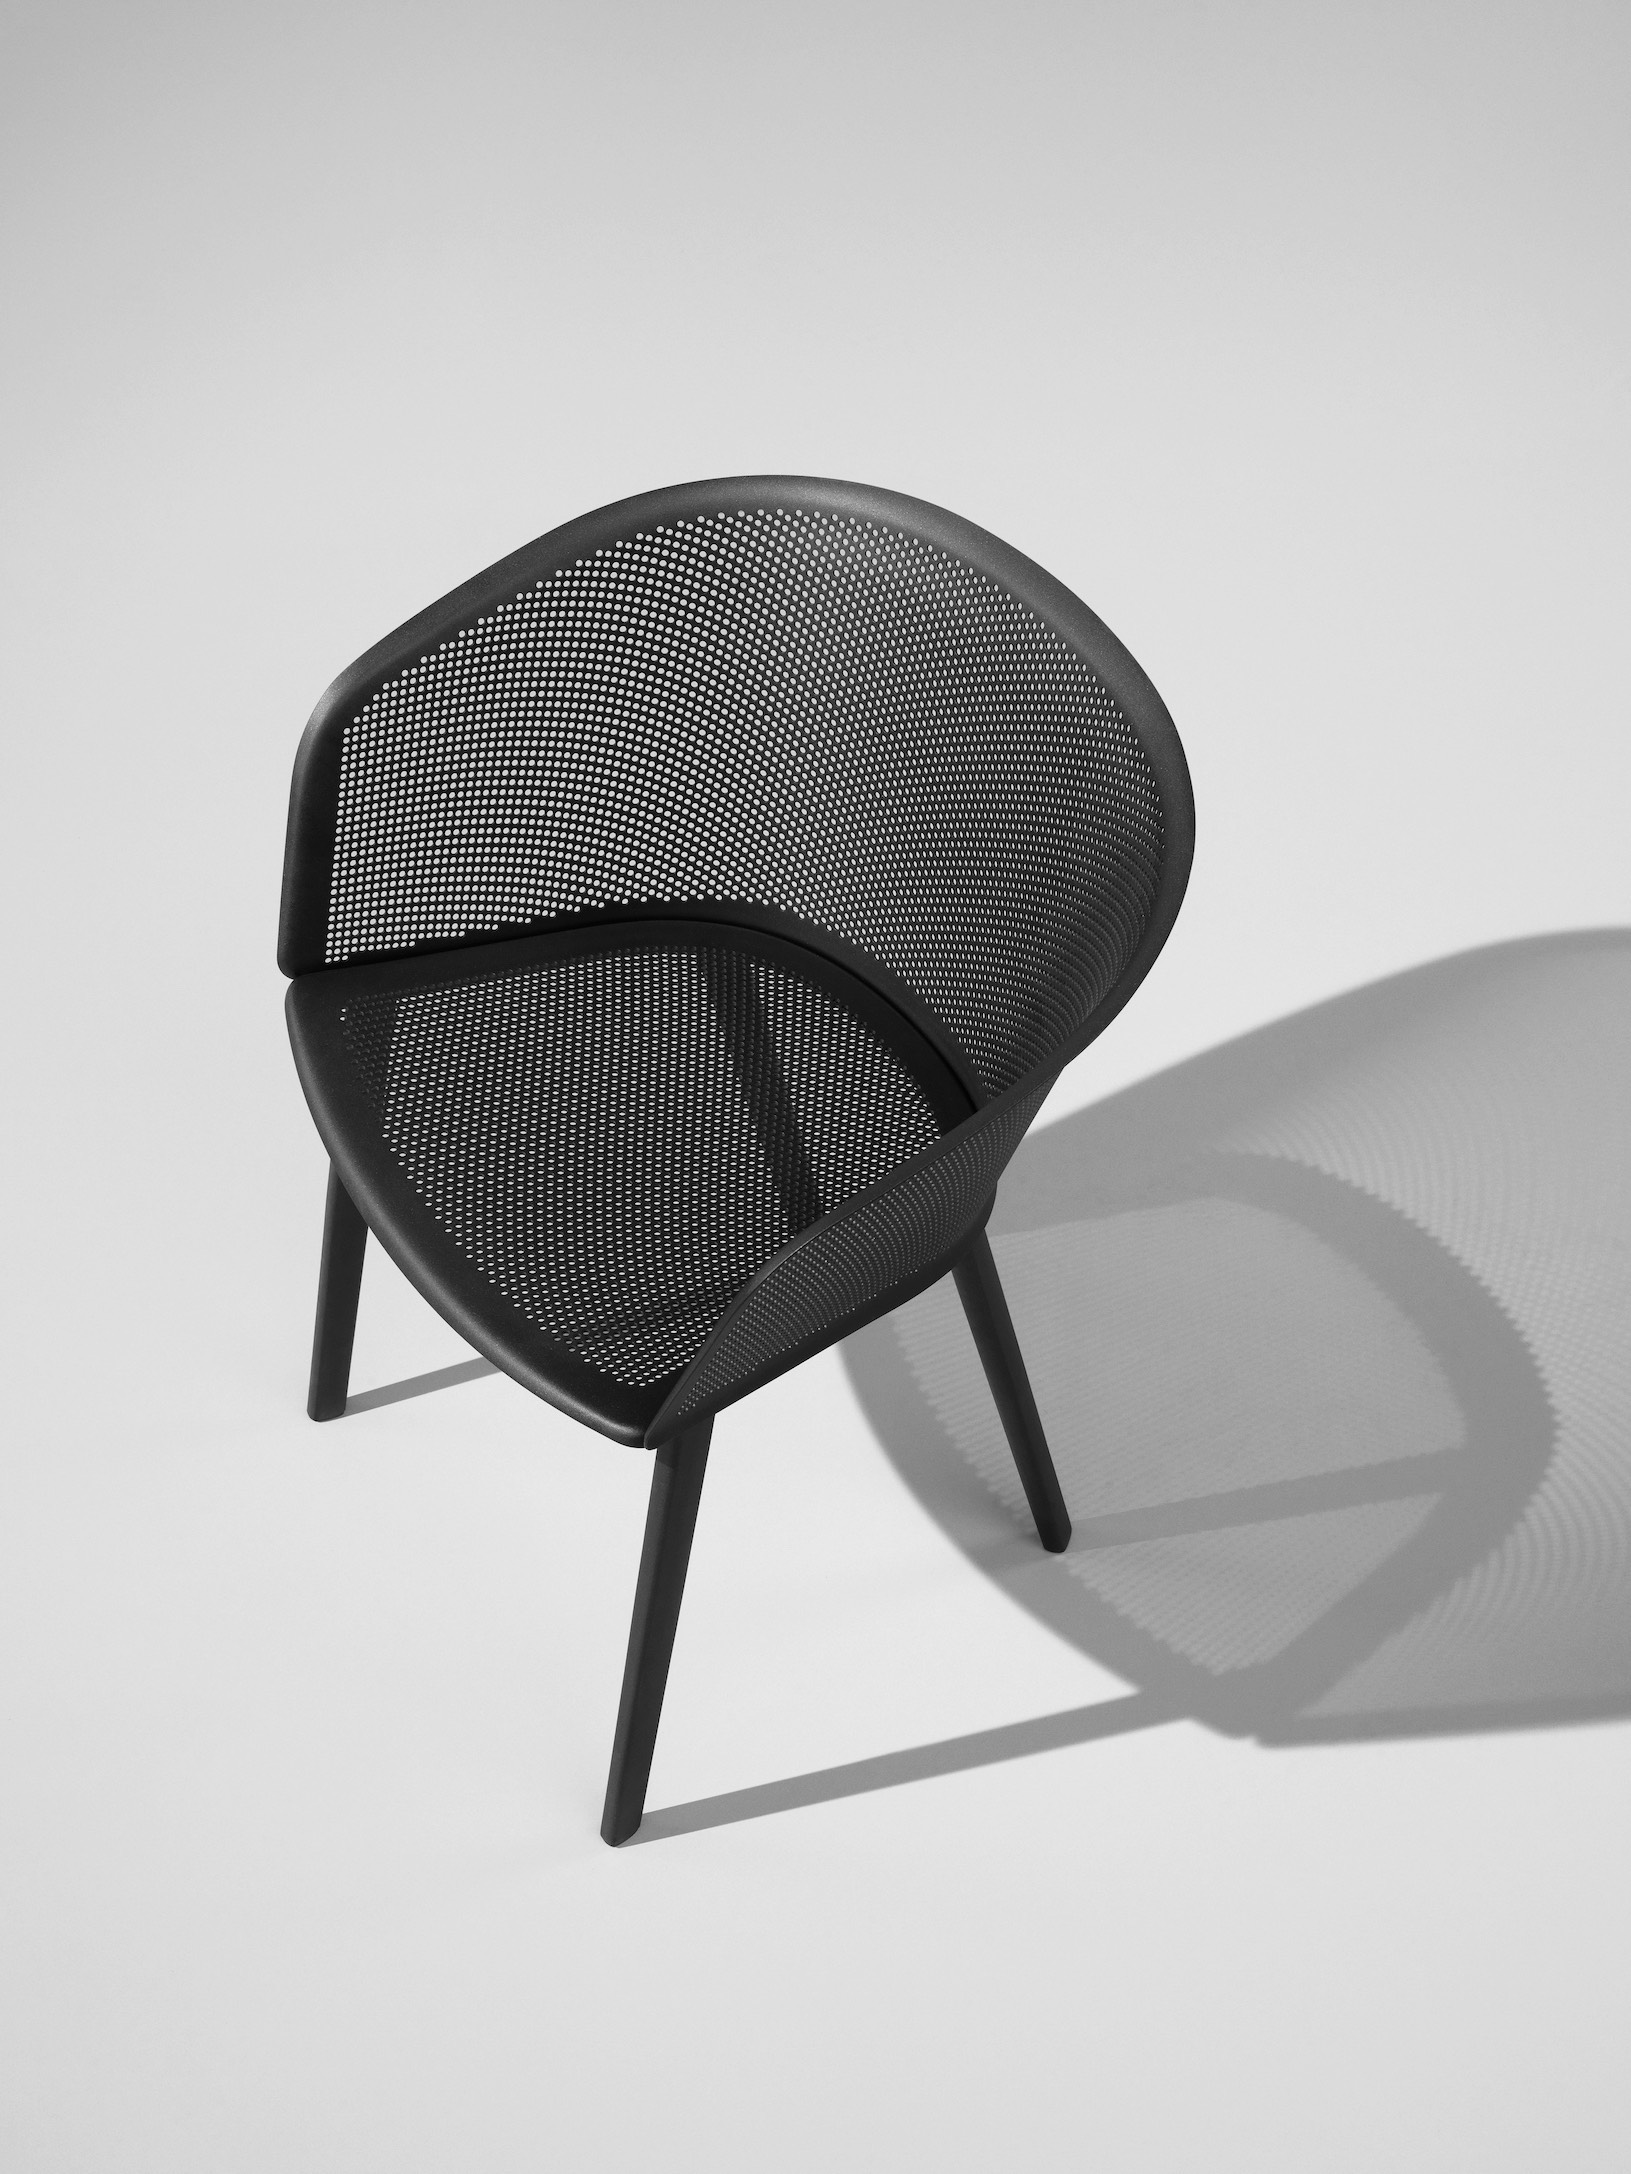 KETTAL STAMPA chair, the perforated metal shell